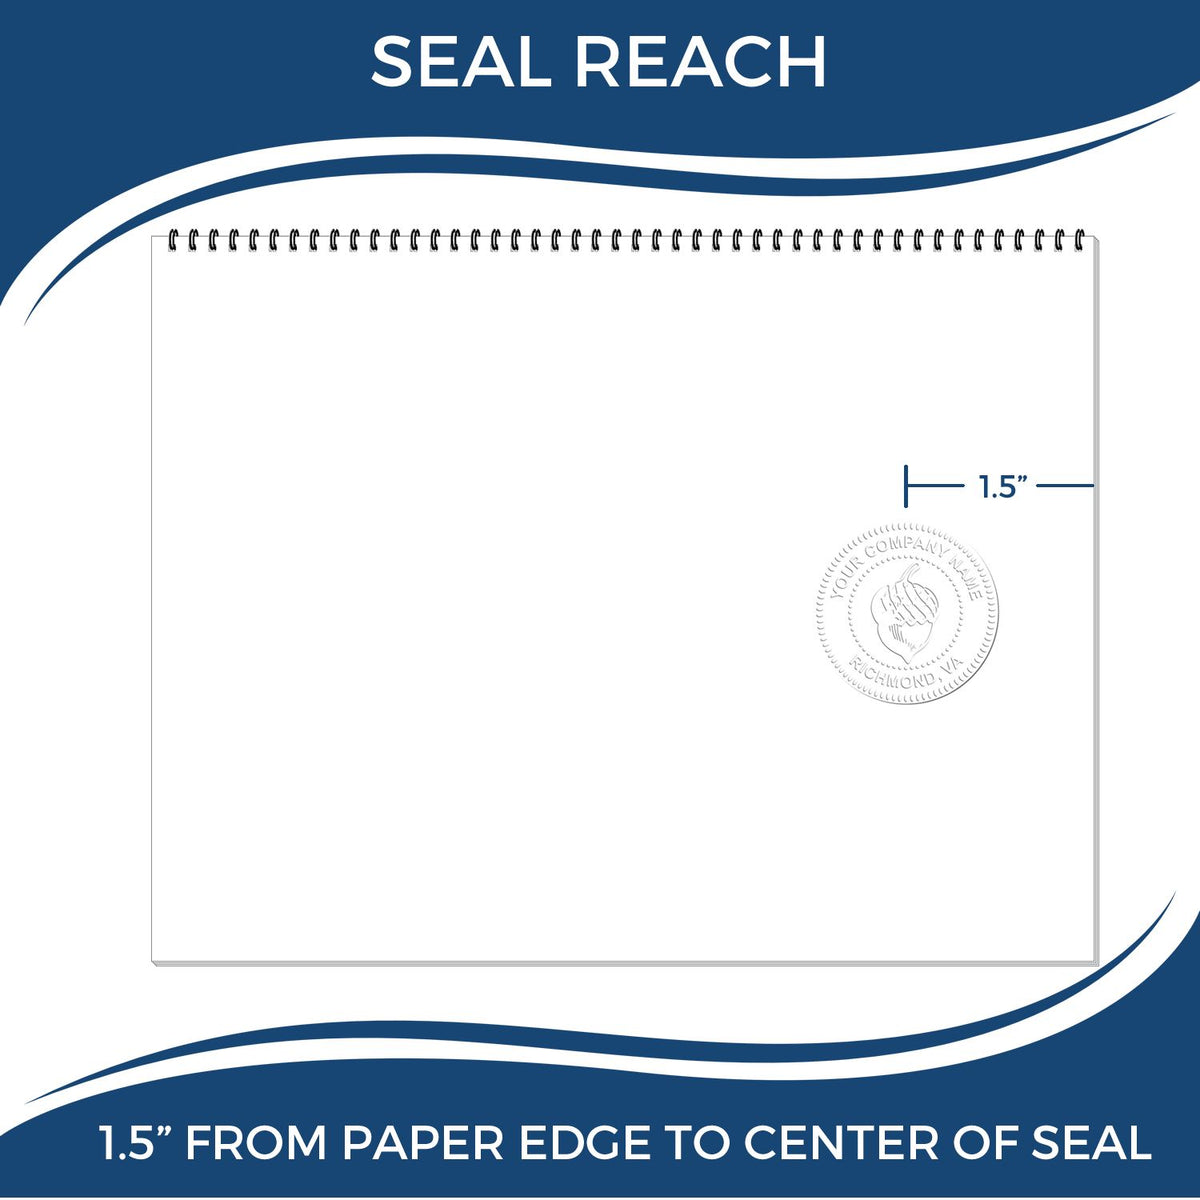 An infographic showing the seal reach which is represented by a ruler and a miniature seal image of the Soft Alabama Professional Engineer Seal